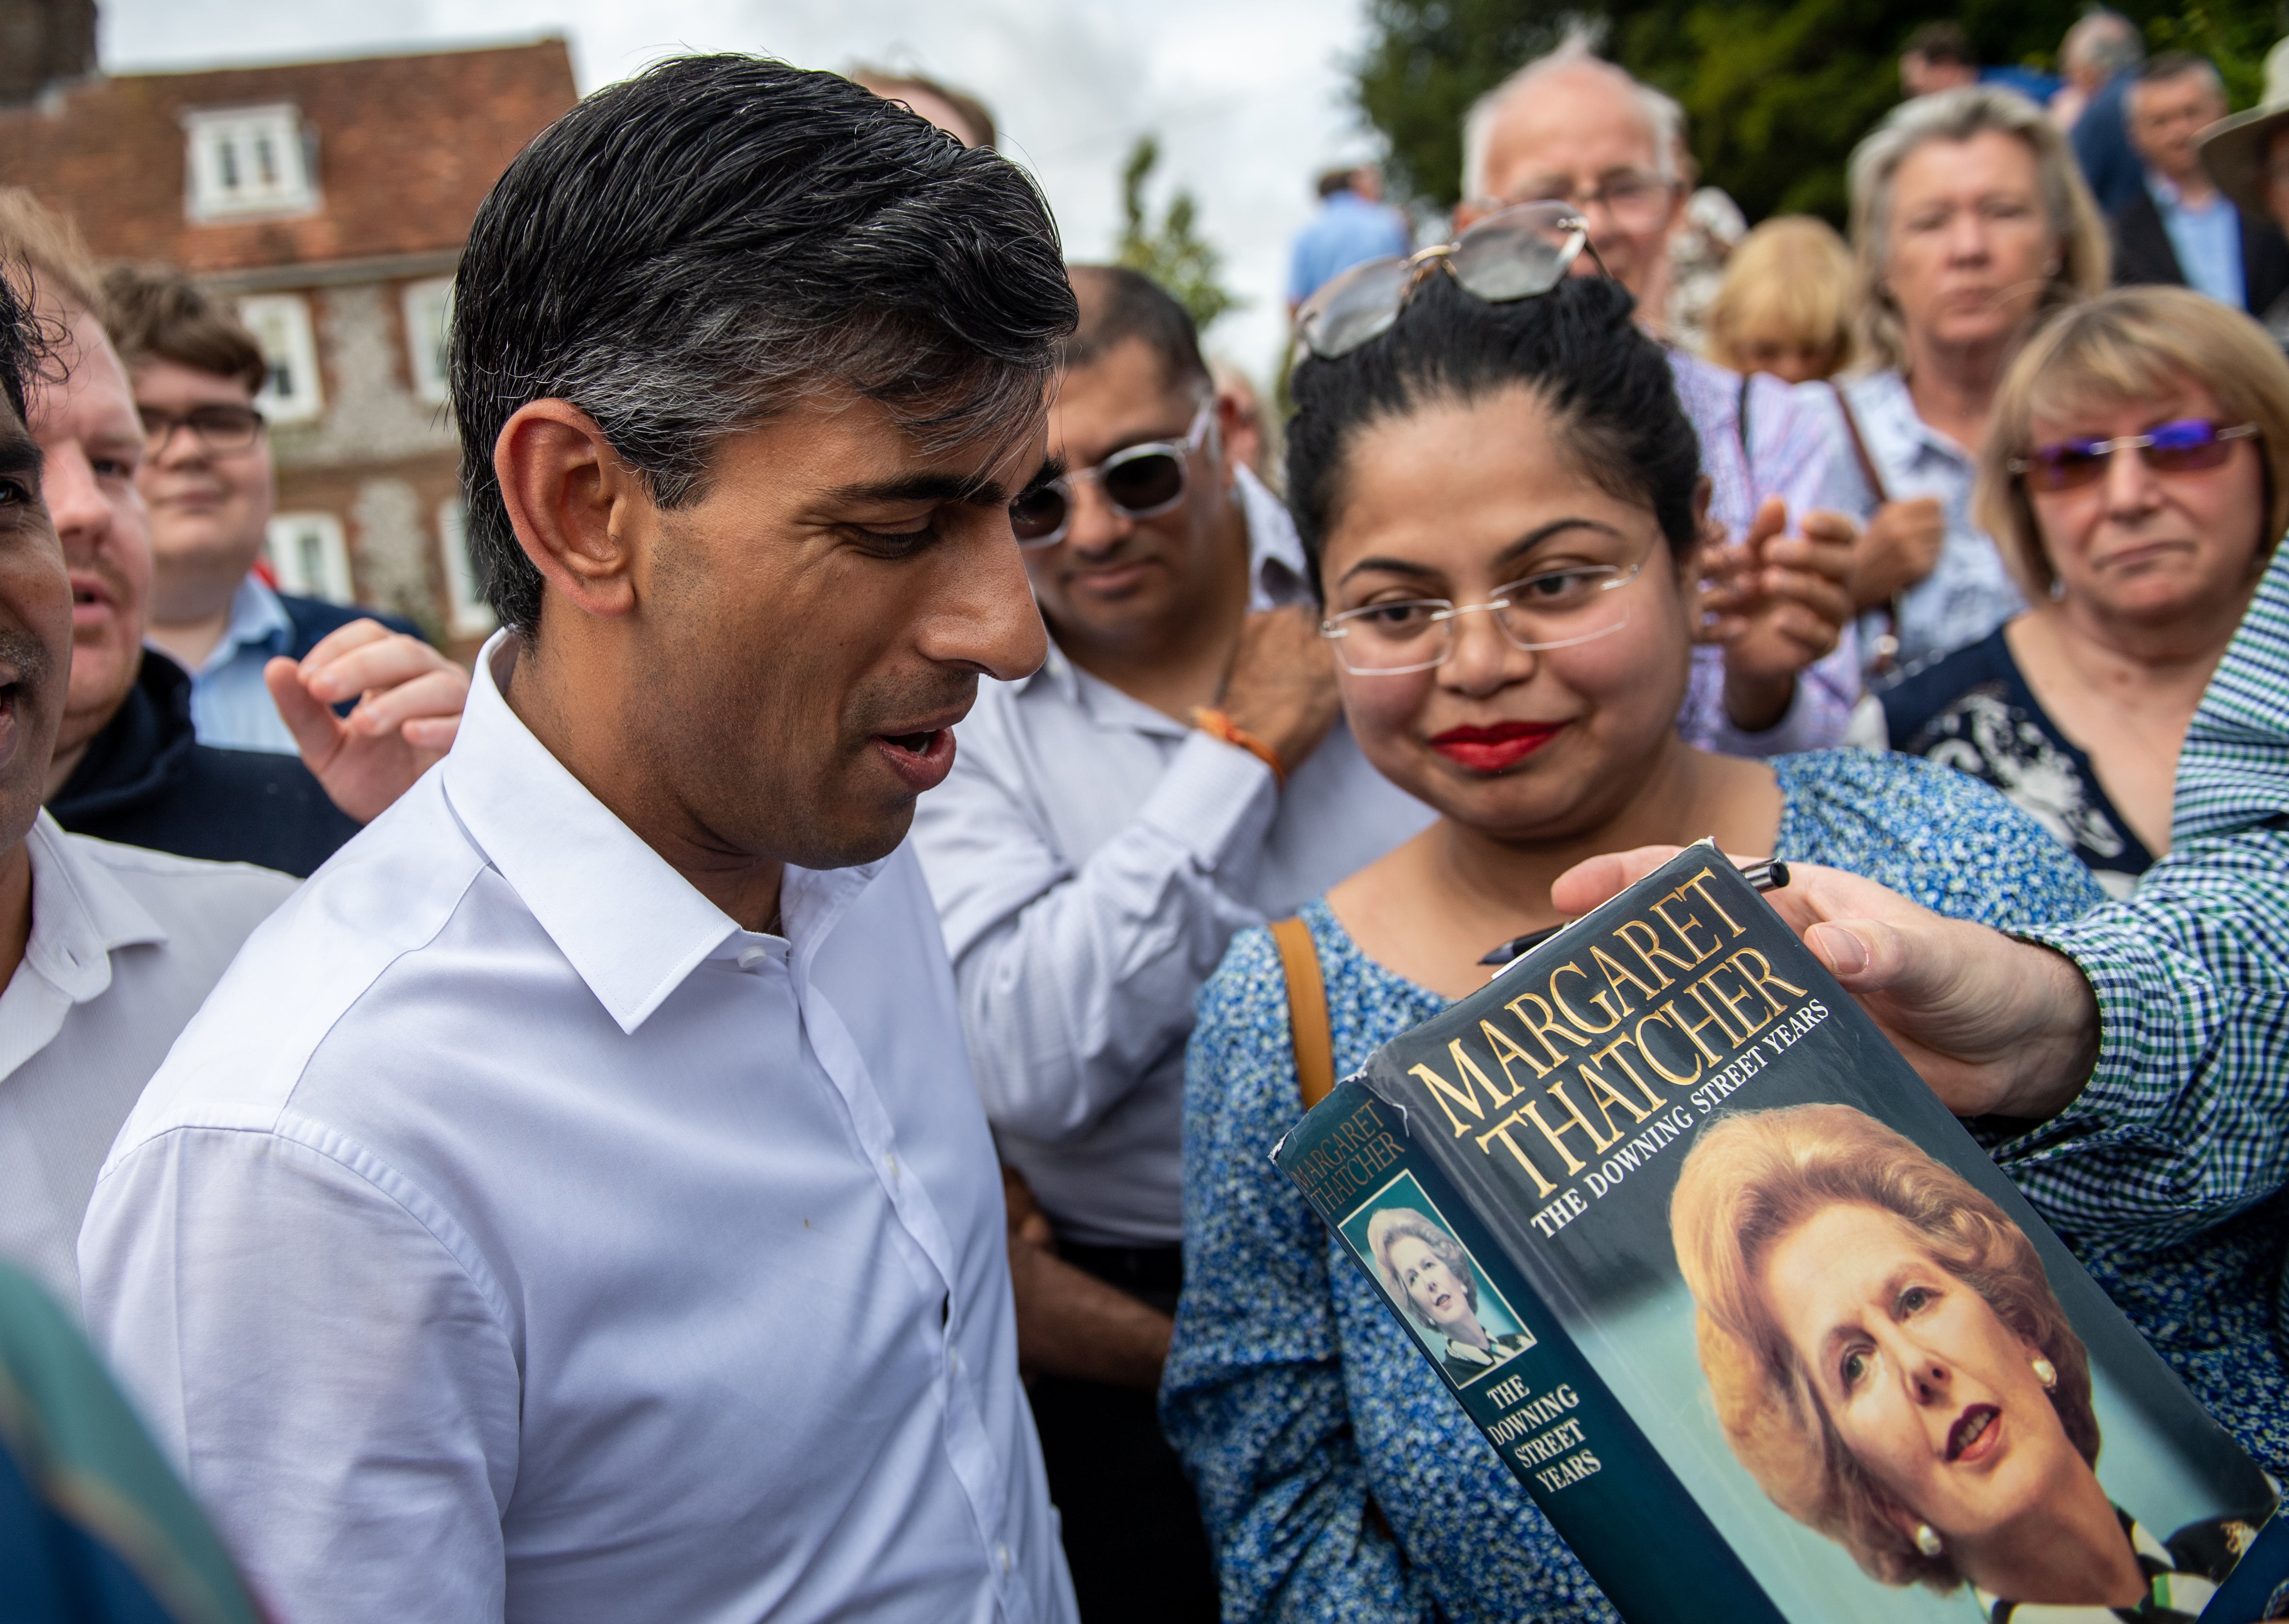 Rishi Sunak is handed a copy of former prime minister Margaret Thatcher’s book to sign at an event at Manor Farm, in Ropley near Winchester, Hampshire (Chris J Ratcliffe/PA)